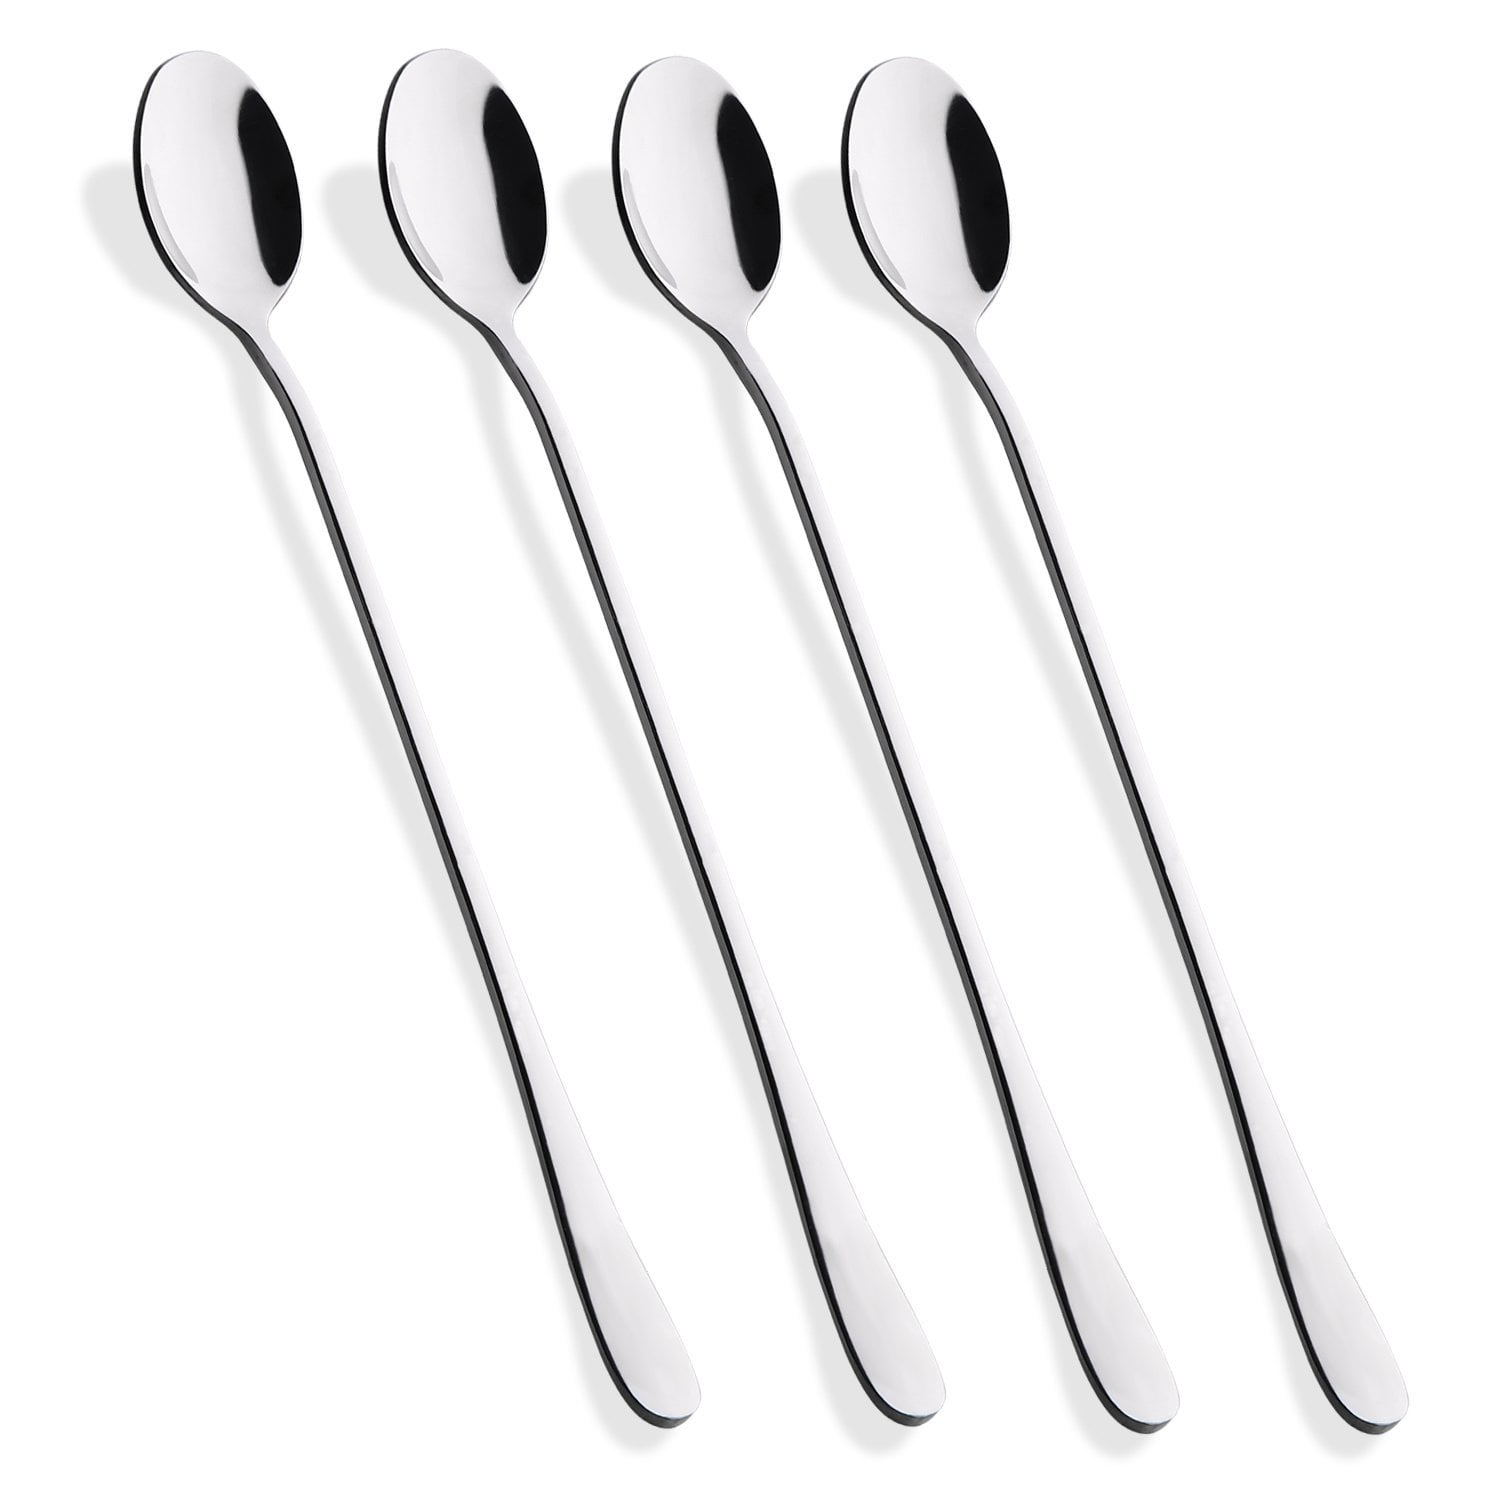 Flower Sugar Spoons 4.9 Inches for Demitasse Espresso Ice Cream and Tea Snamonkia Set of 16 Stainless Steel Dessert Spoons for Coffee Silver